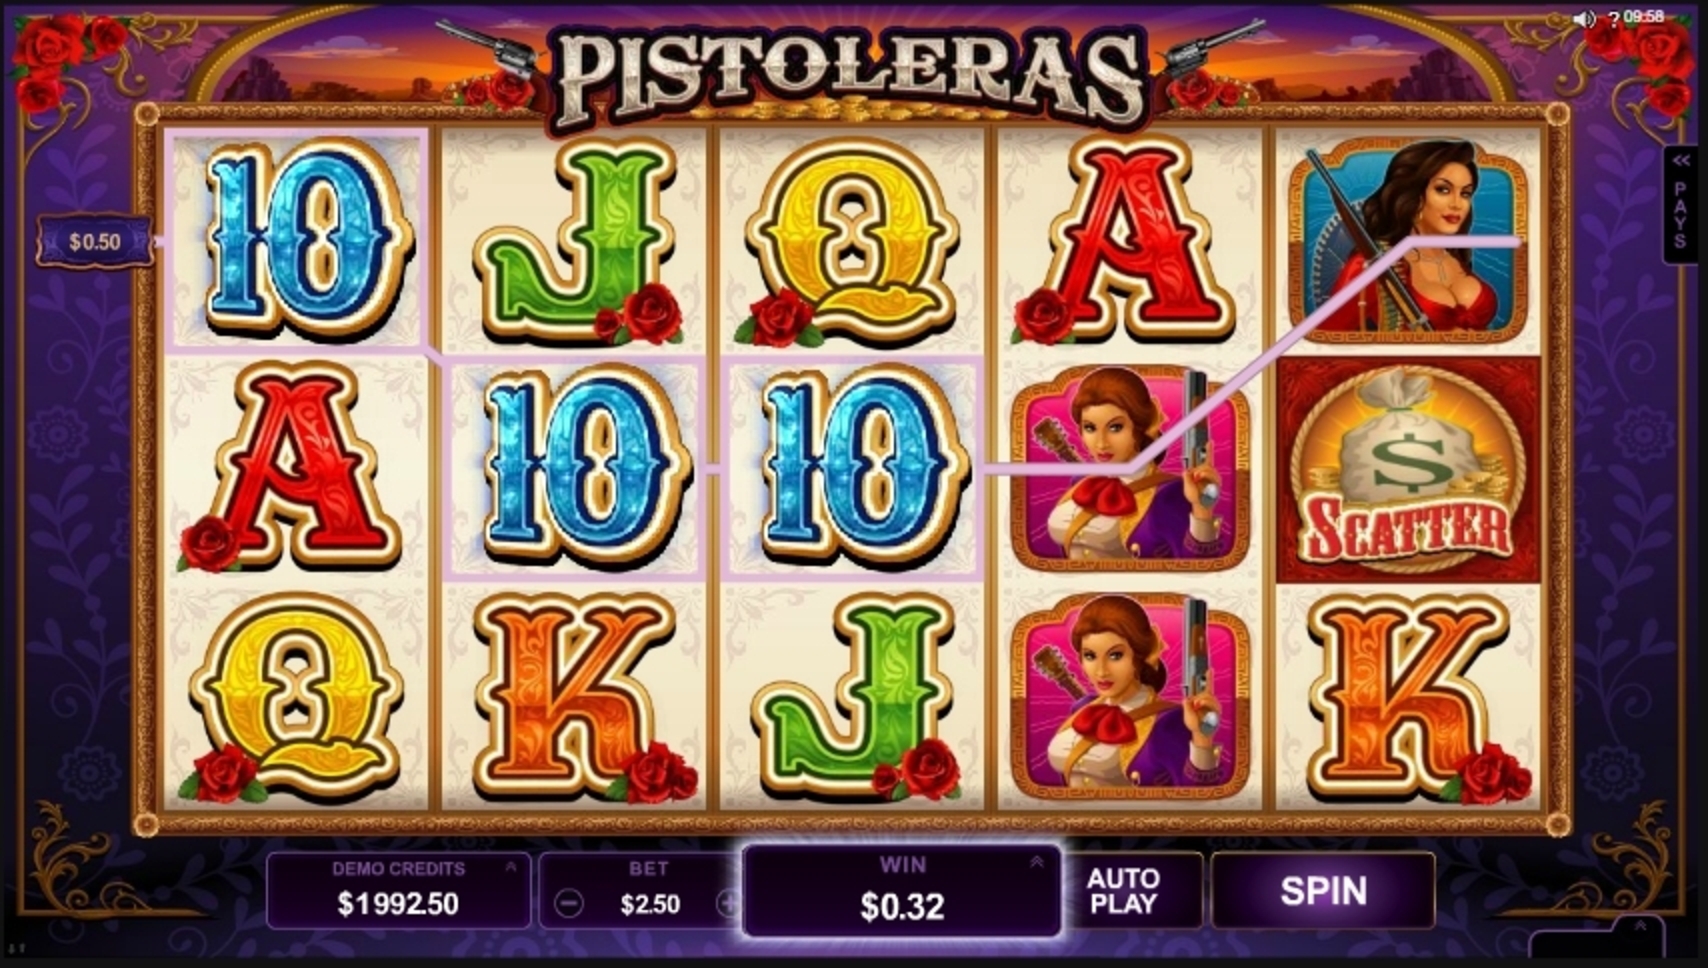 Win Money in Pistoleras Free Slot Game by Microgaming